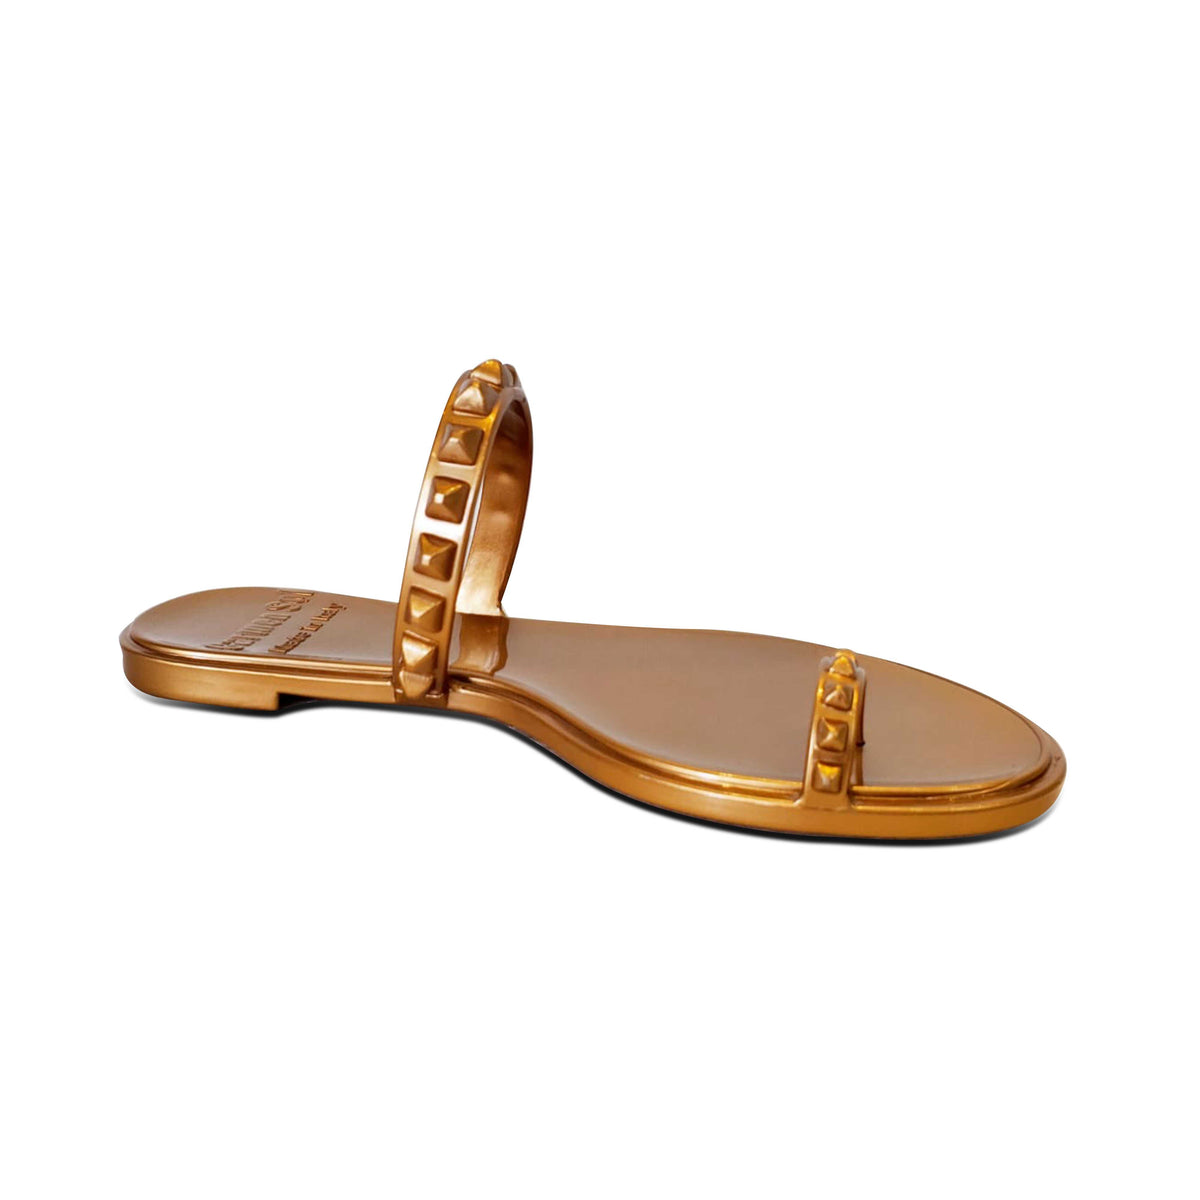 Rose scented Carmen Sol jelly sandals in color rose gold